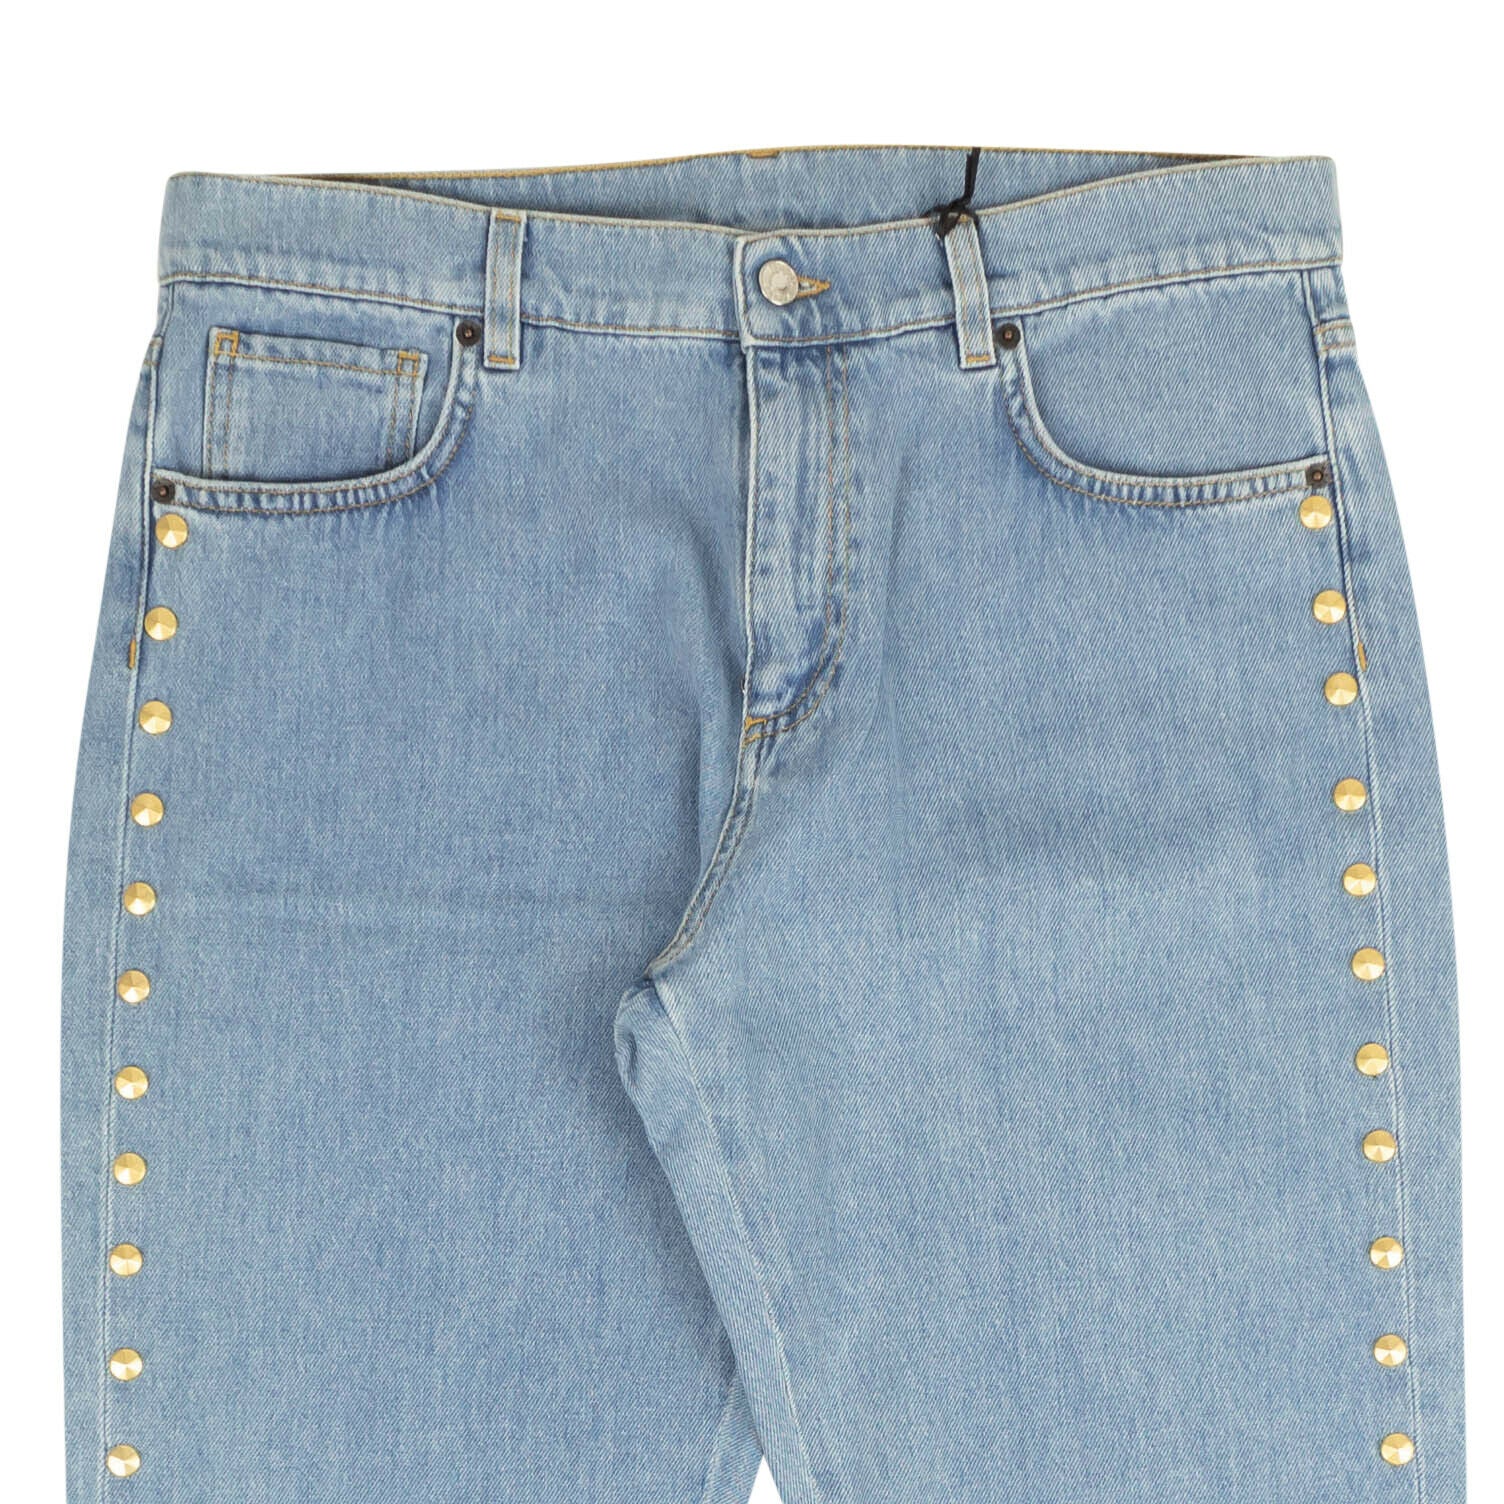 Moschino Couture Gold Nailhead Accent Jeans - Wash